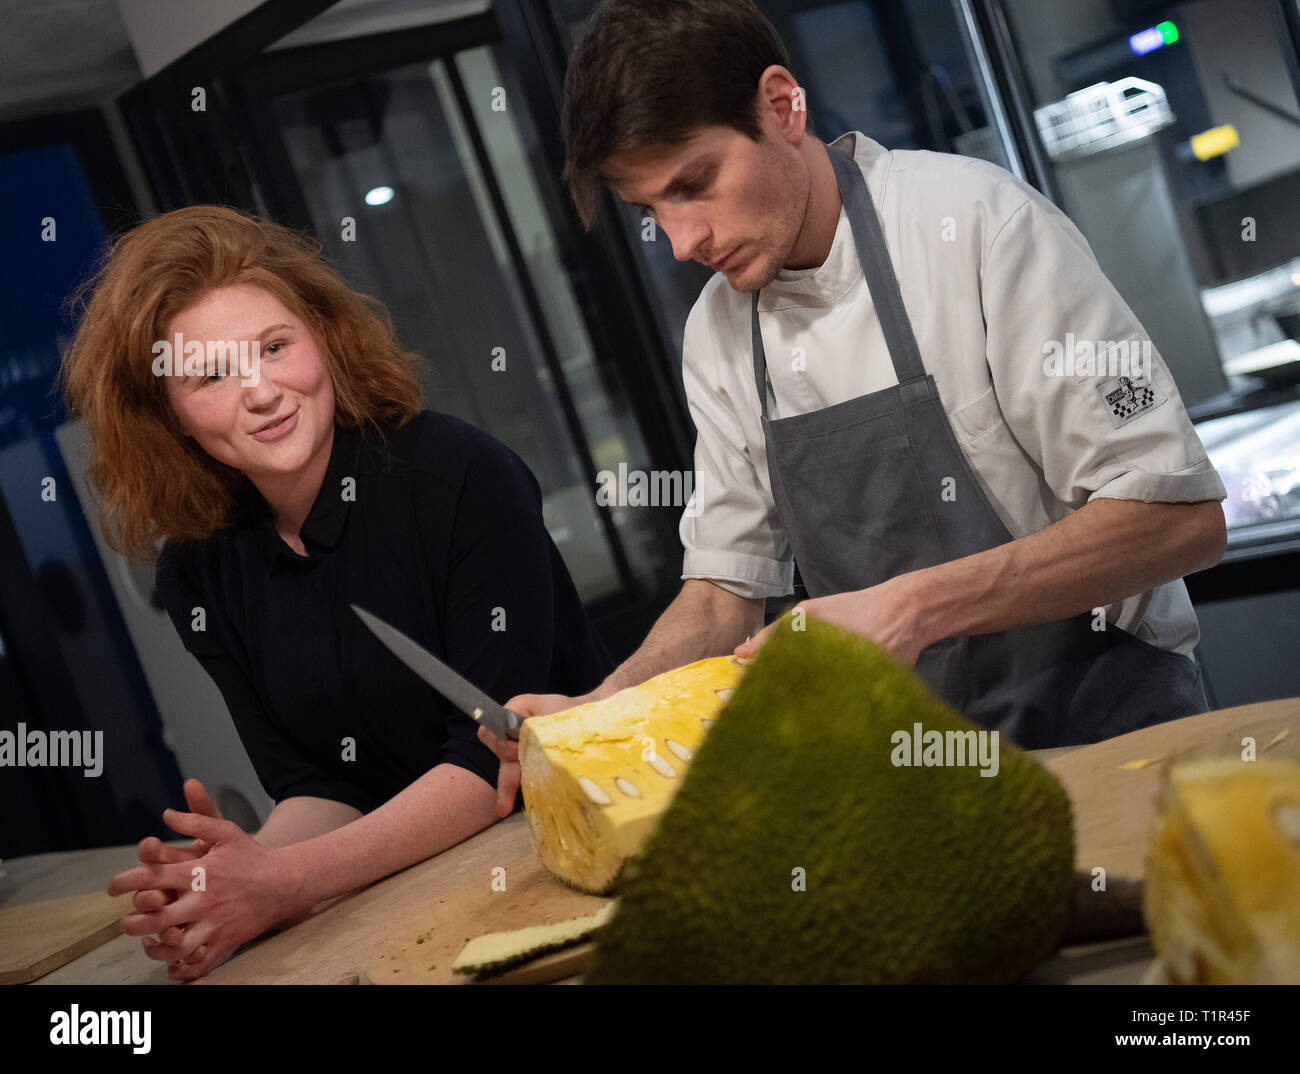 Berlin, Germany. 26th Mar, 2019. A cook opens a jackfruit at a press dinner to introduce jackfruit dishes in the restaurant 'Hermann's'. On the left is Verena Bahlsen. The 26-year-old great-granddaughter of the founder of the biscuit factory Bahlsen and daughter of Werner Bahlsen, the former managing director of the Hanover biscuit dynasty Bahlsen, has founded a restaurant with a colleague in which Jackfruit burgers are served. (to dpa 'A Bahlsen and the Jackfruit') Credit: Monika Skolimowska/dpa-Zentralbild/dpa/Alamy Live News Stock Photo